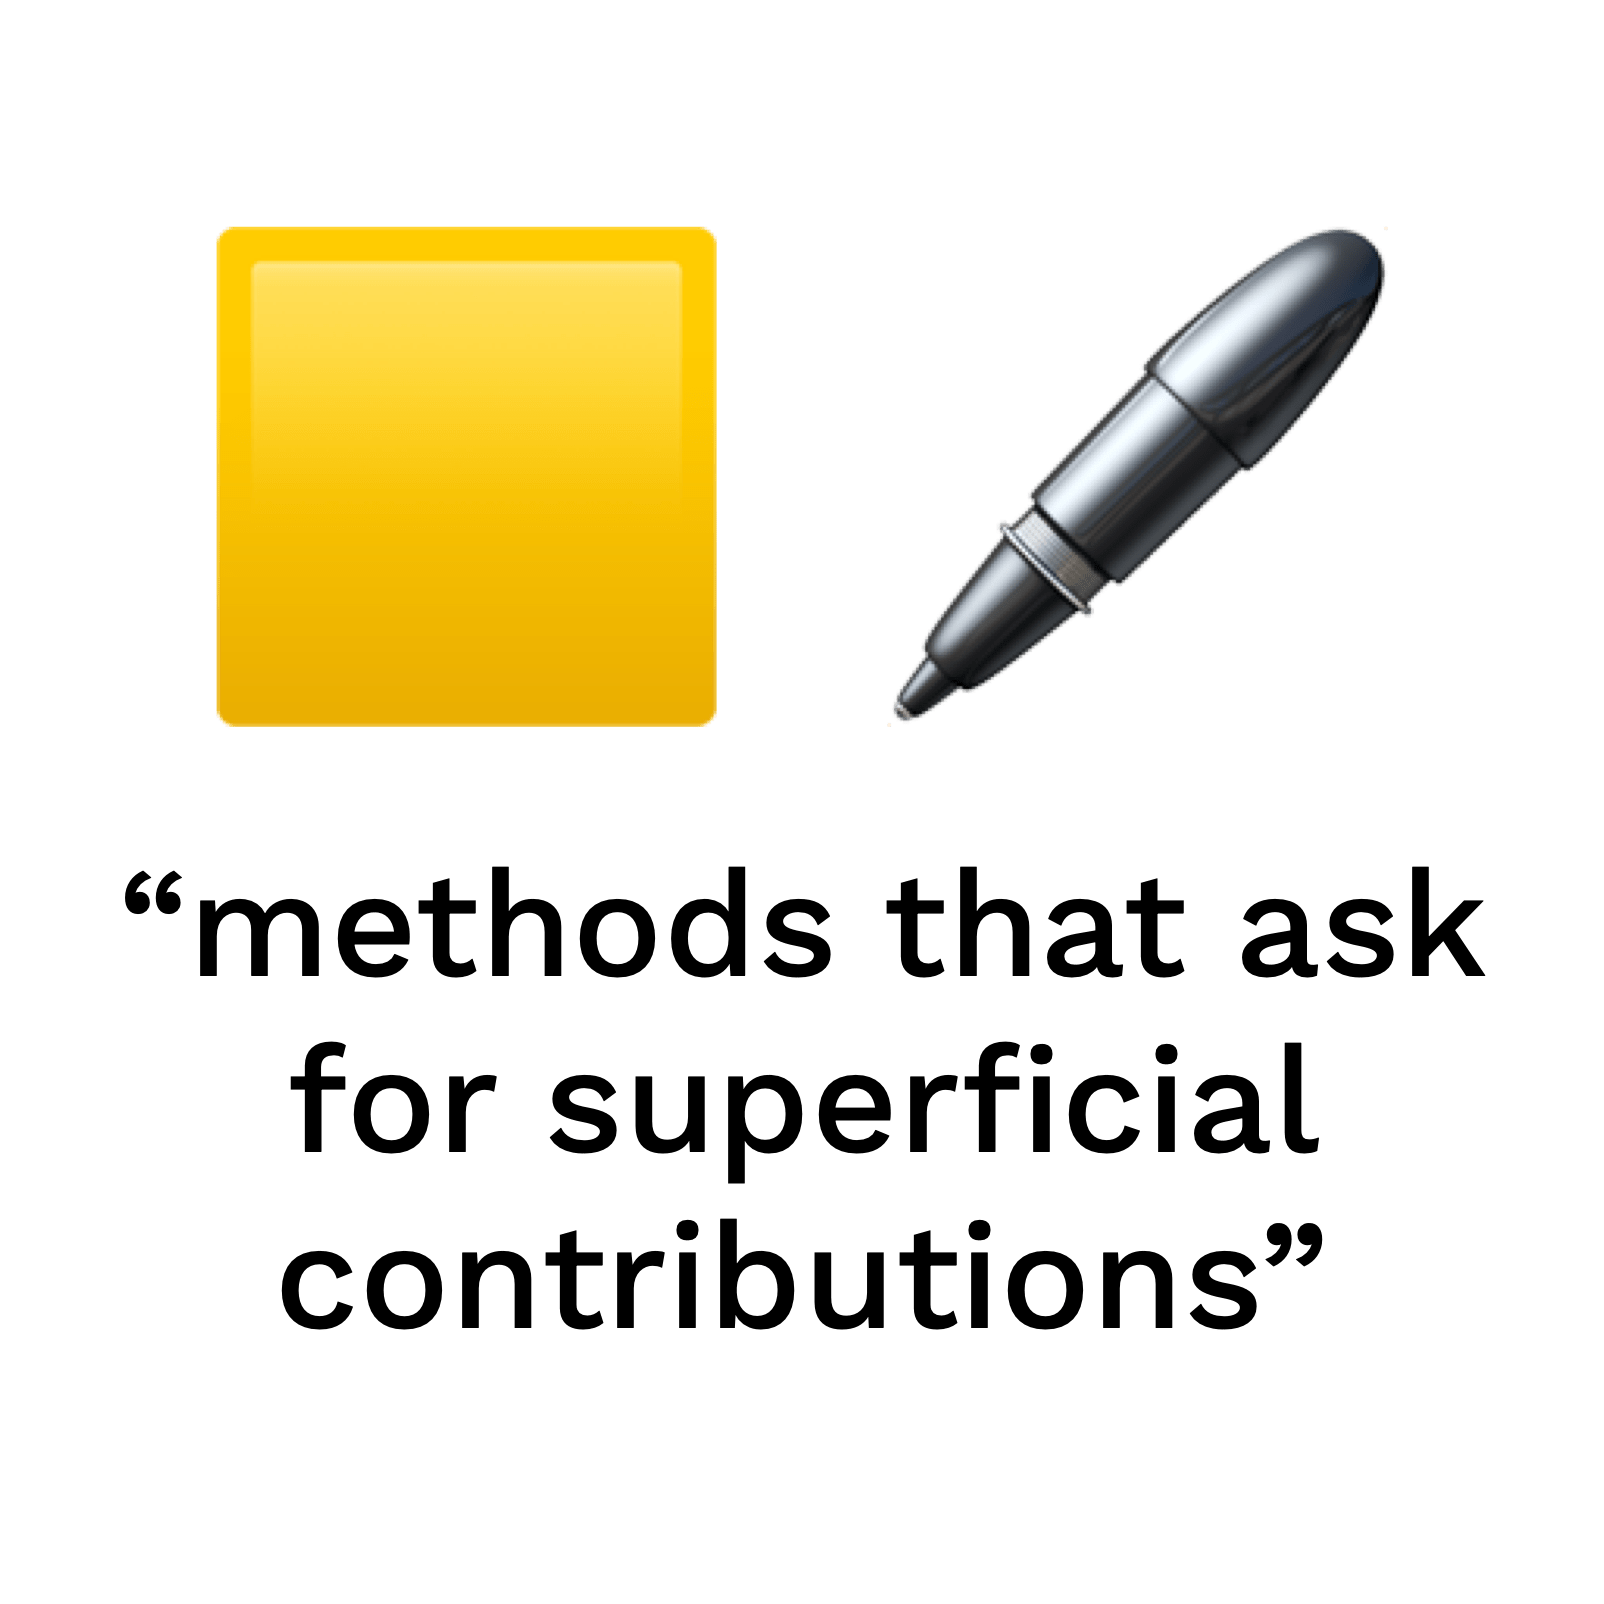 "methods that ask for superficial contributions"